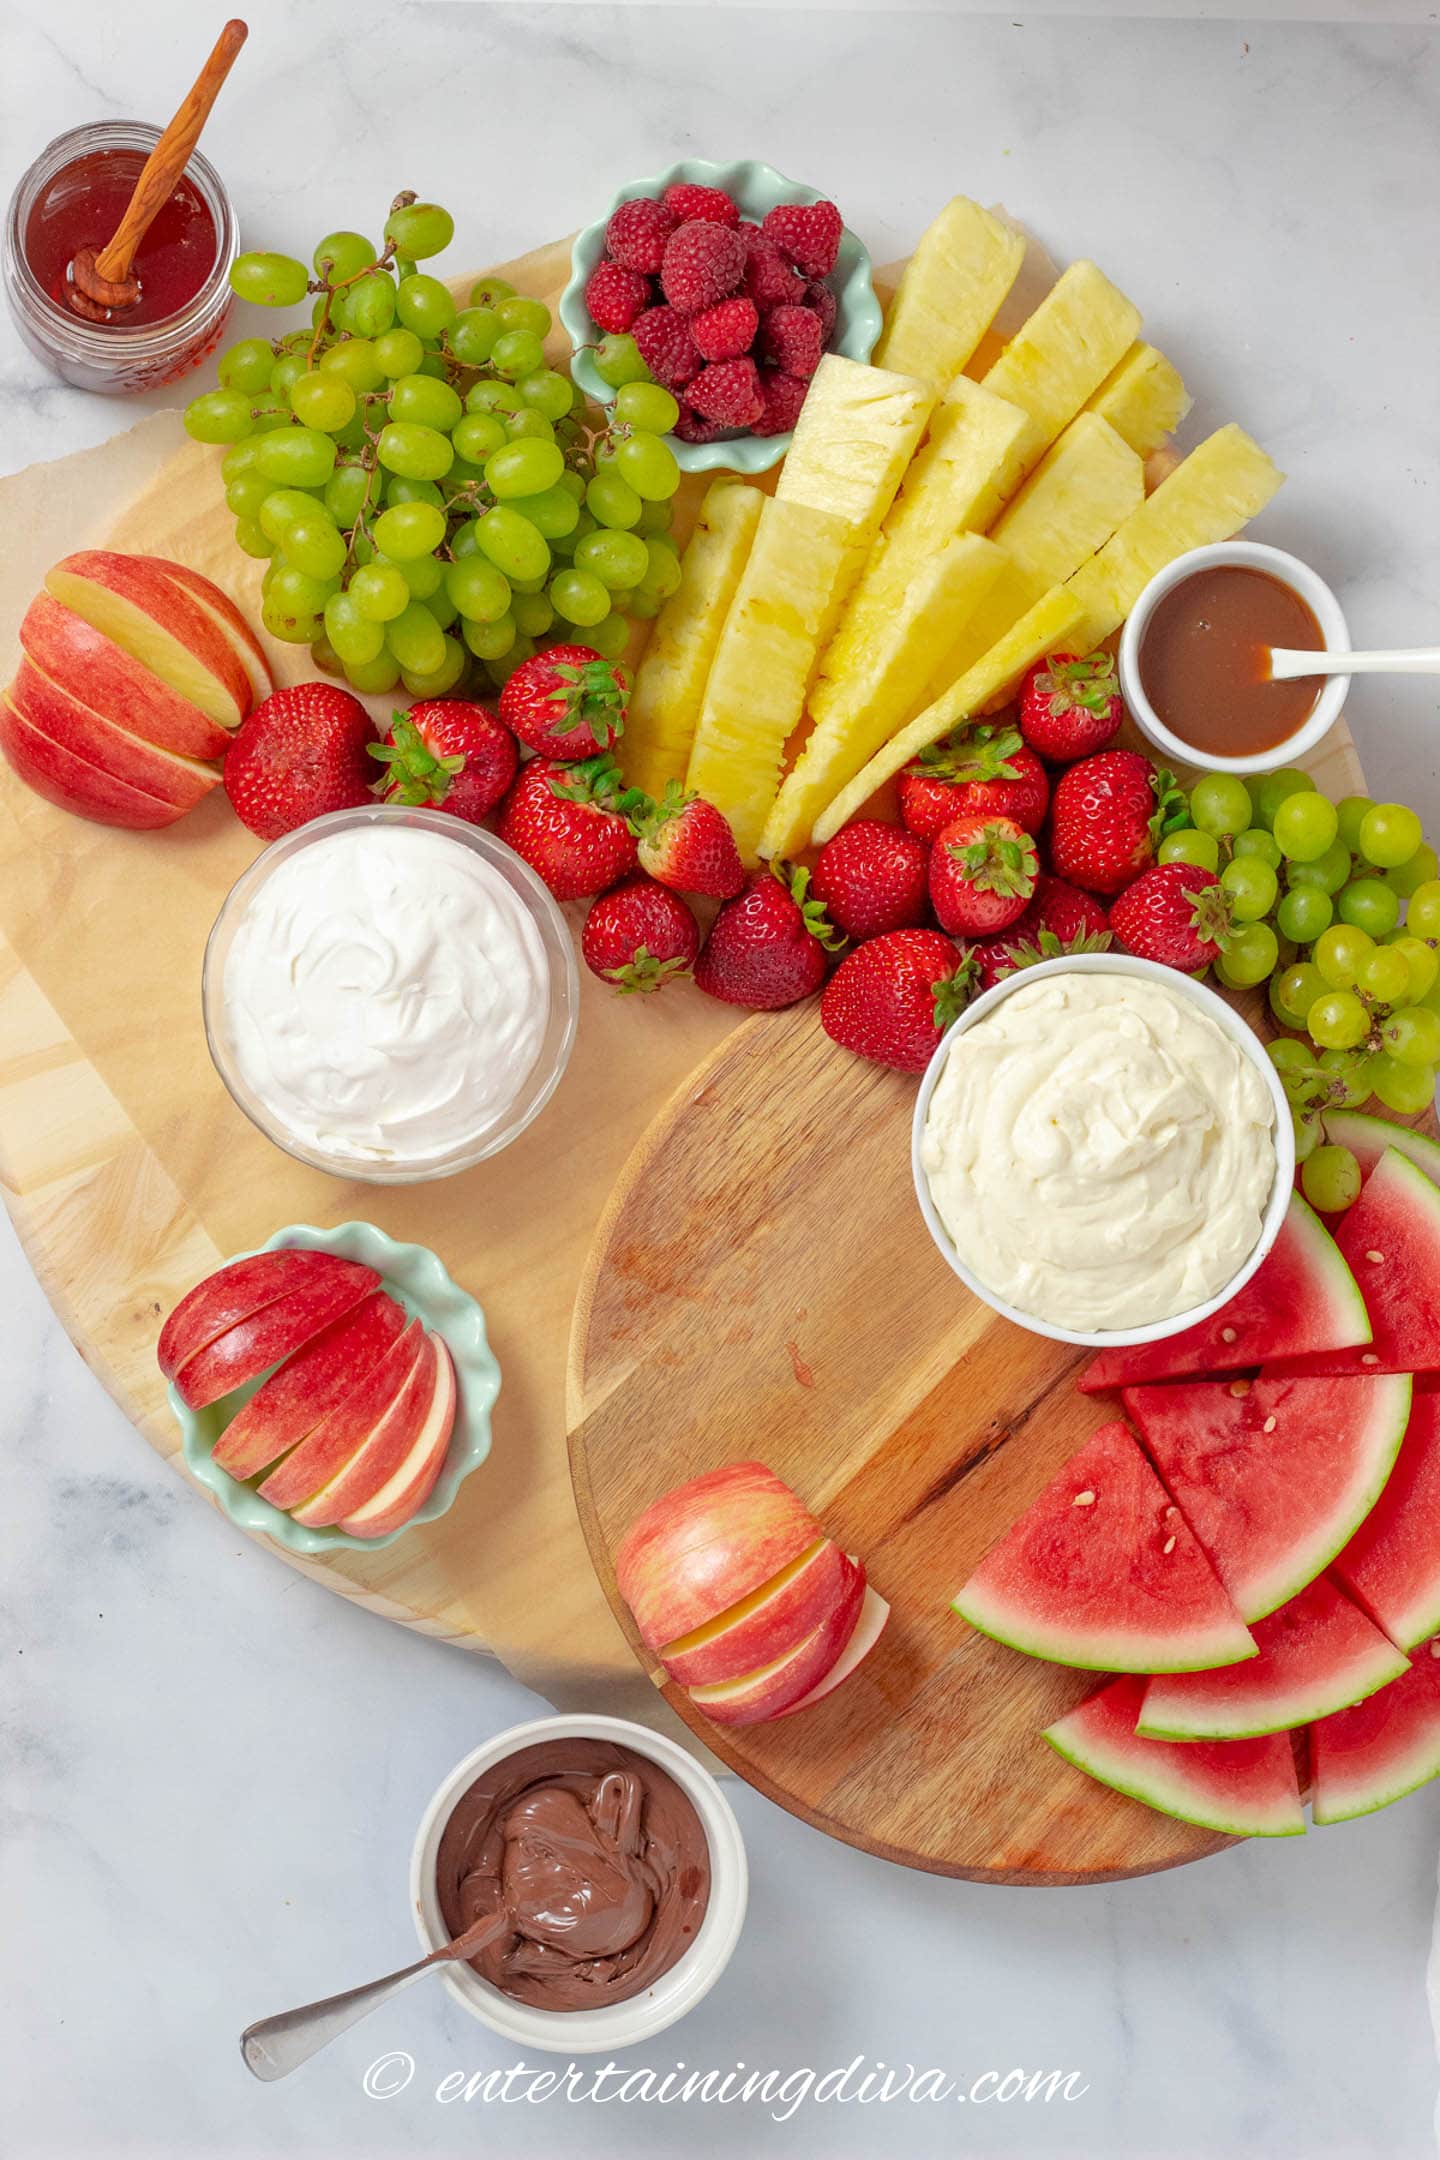 fruit charcuterie board with strawberries, apples, pineapple, watermelon, grapes and dips